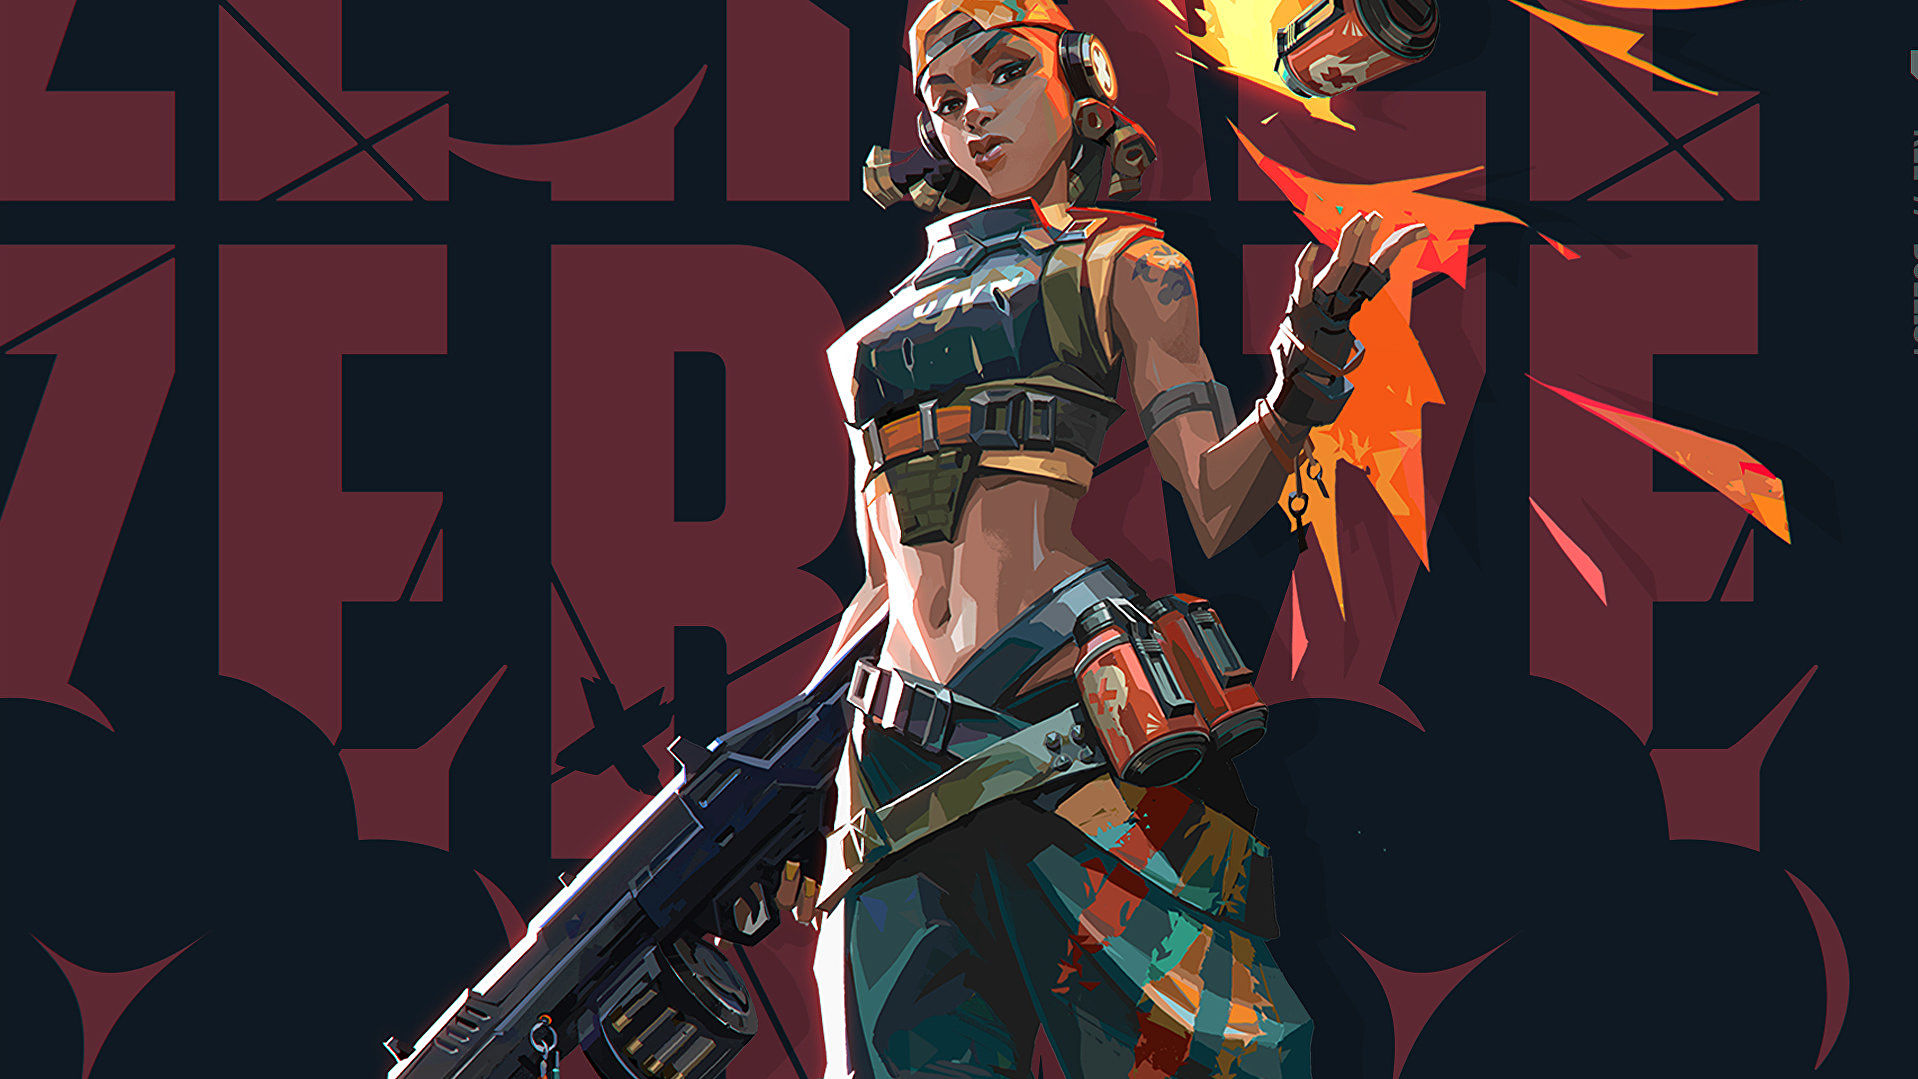 HD wallpaper: Valorant, Riot Games, first-person shooter, RAZE